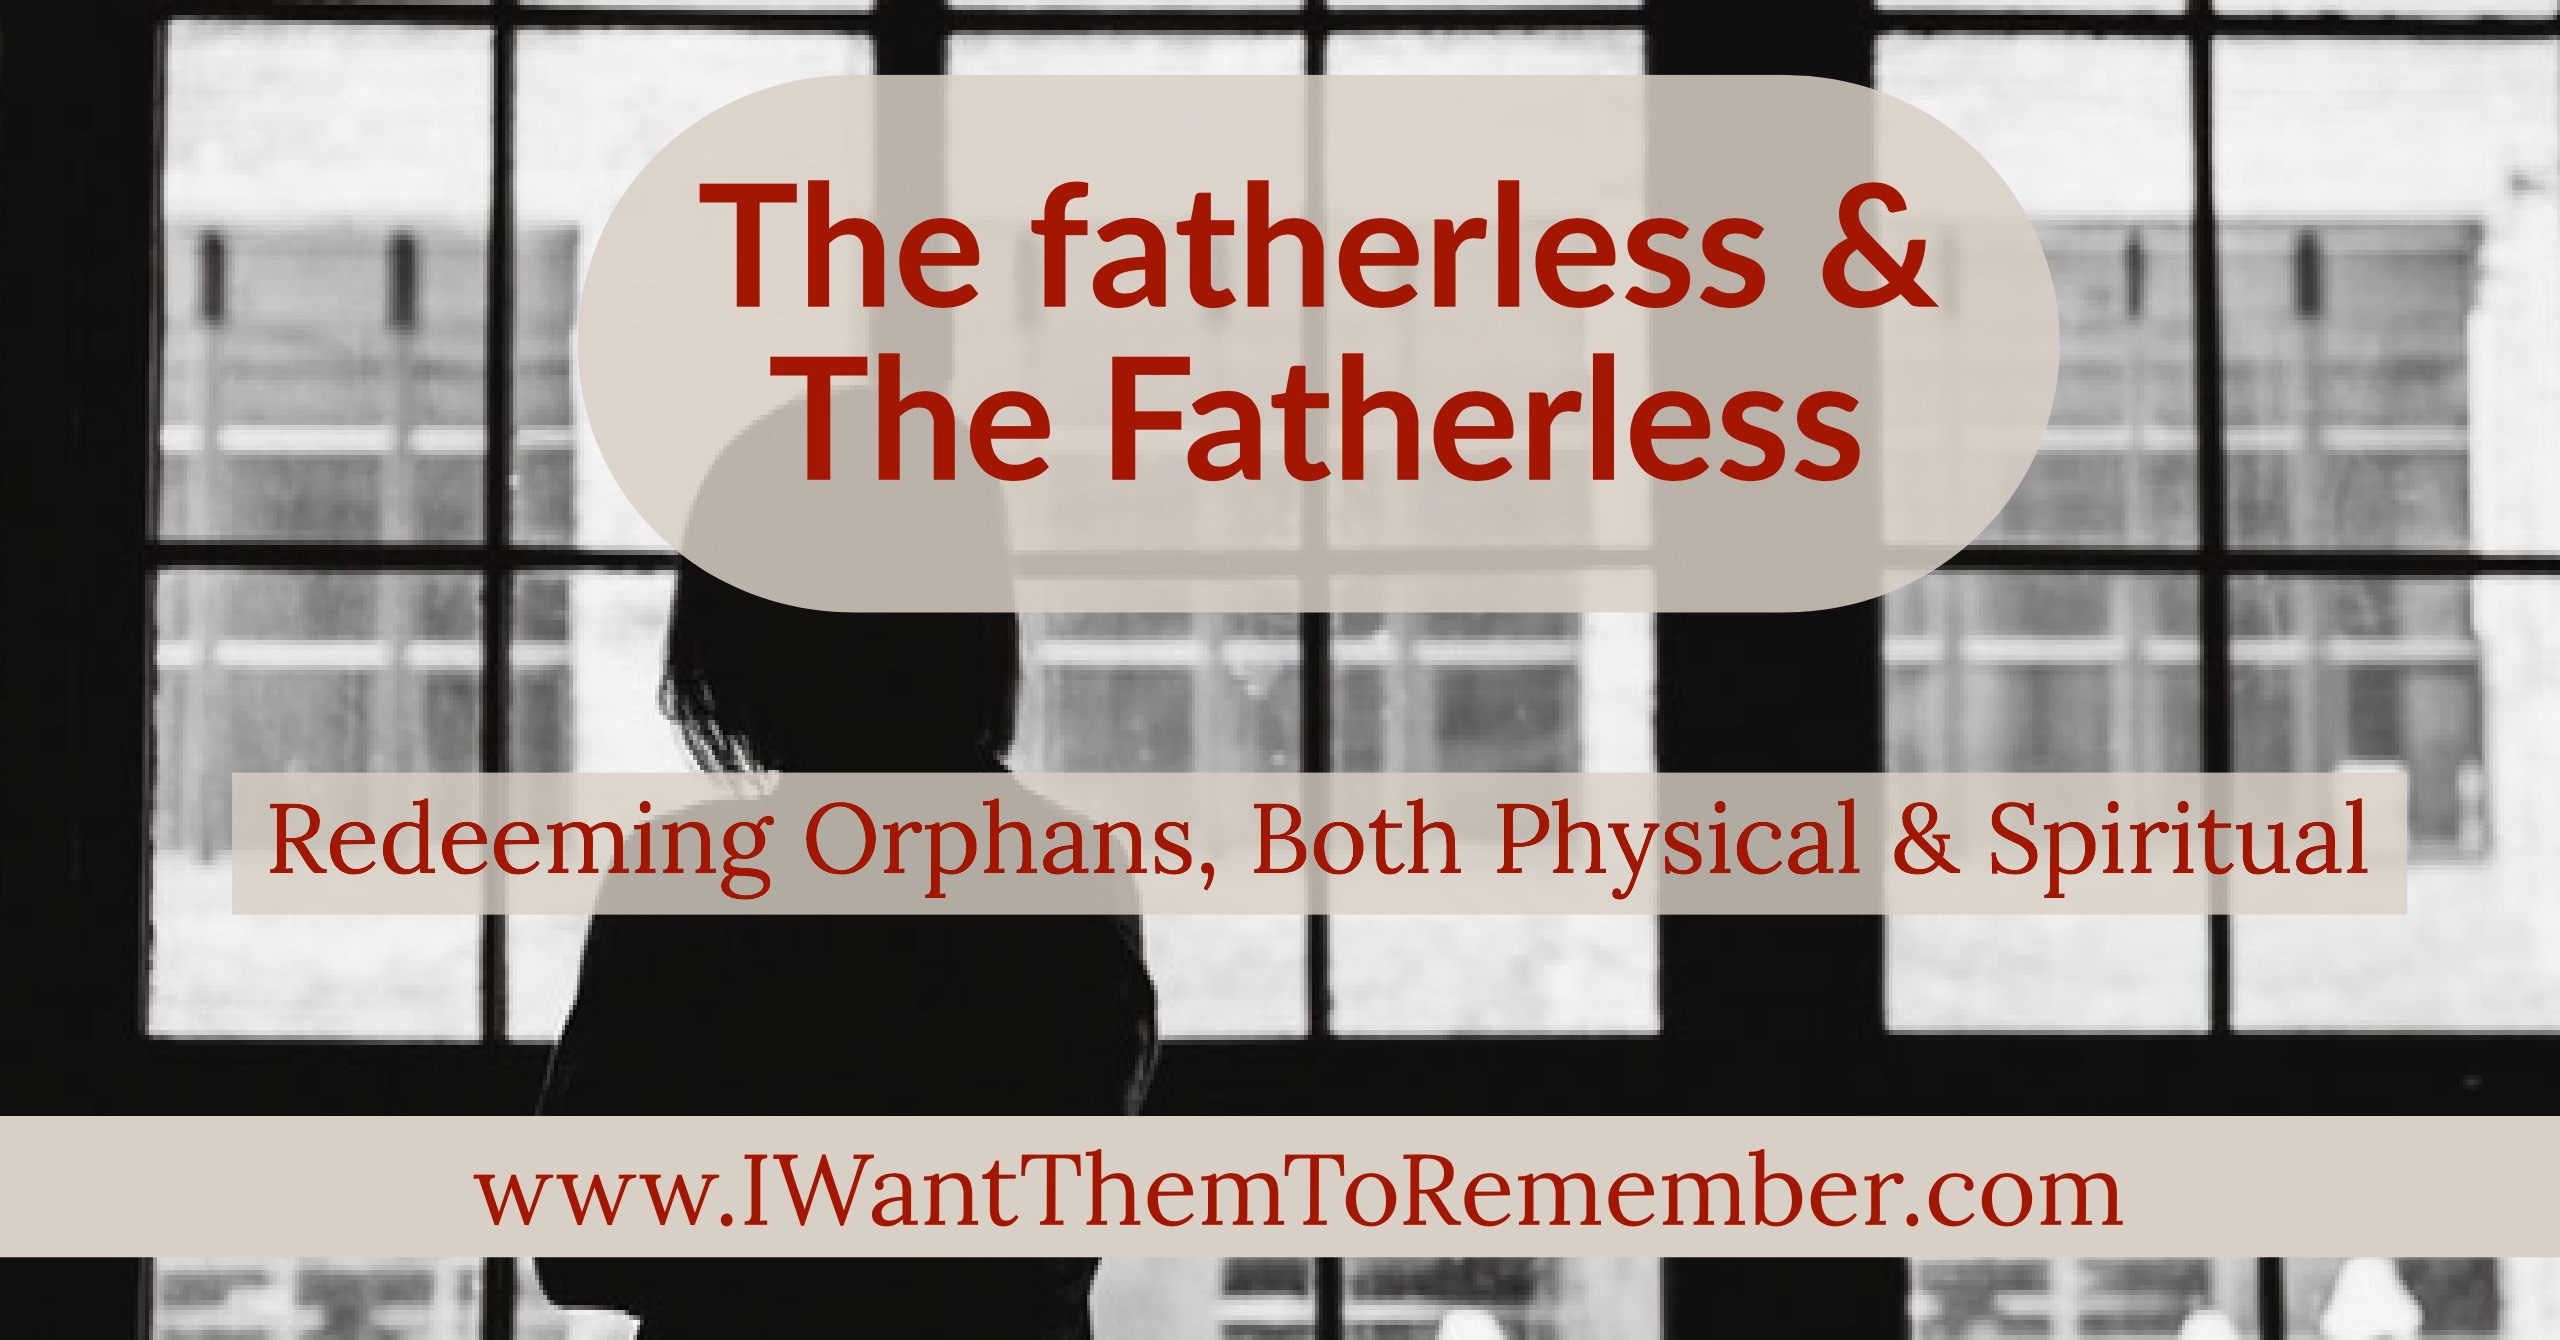 The fatherless/the Fatherless